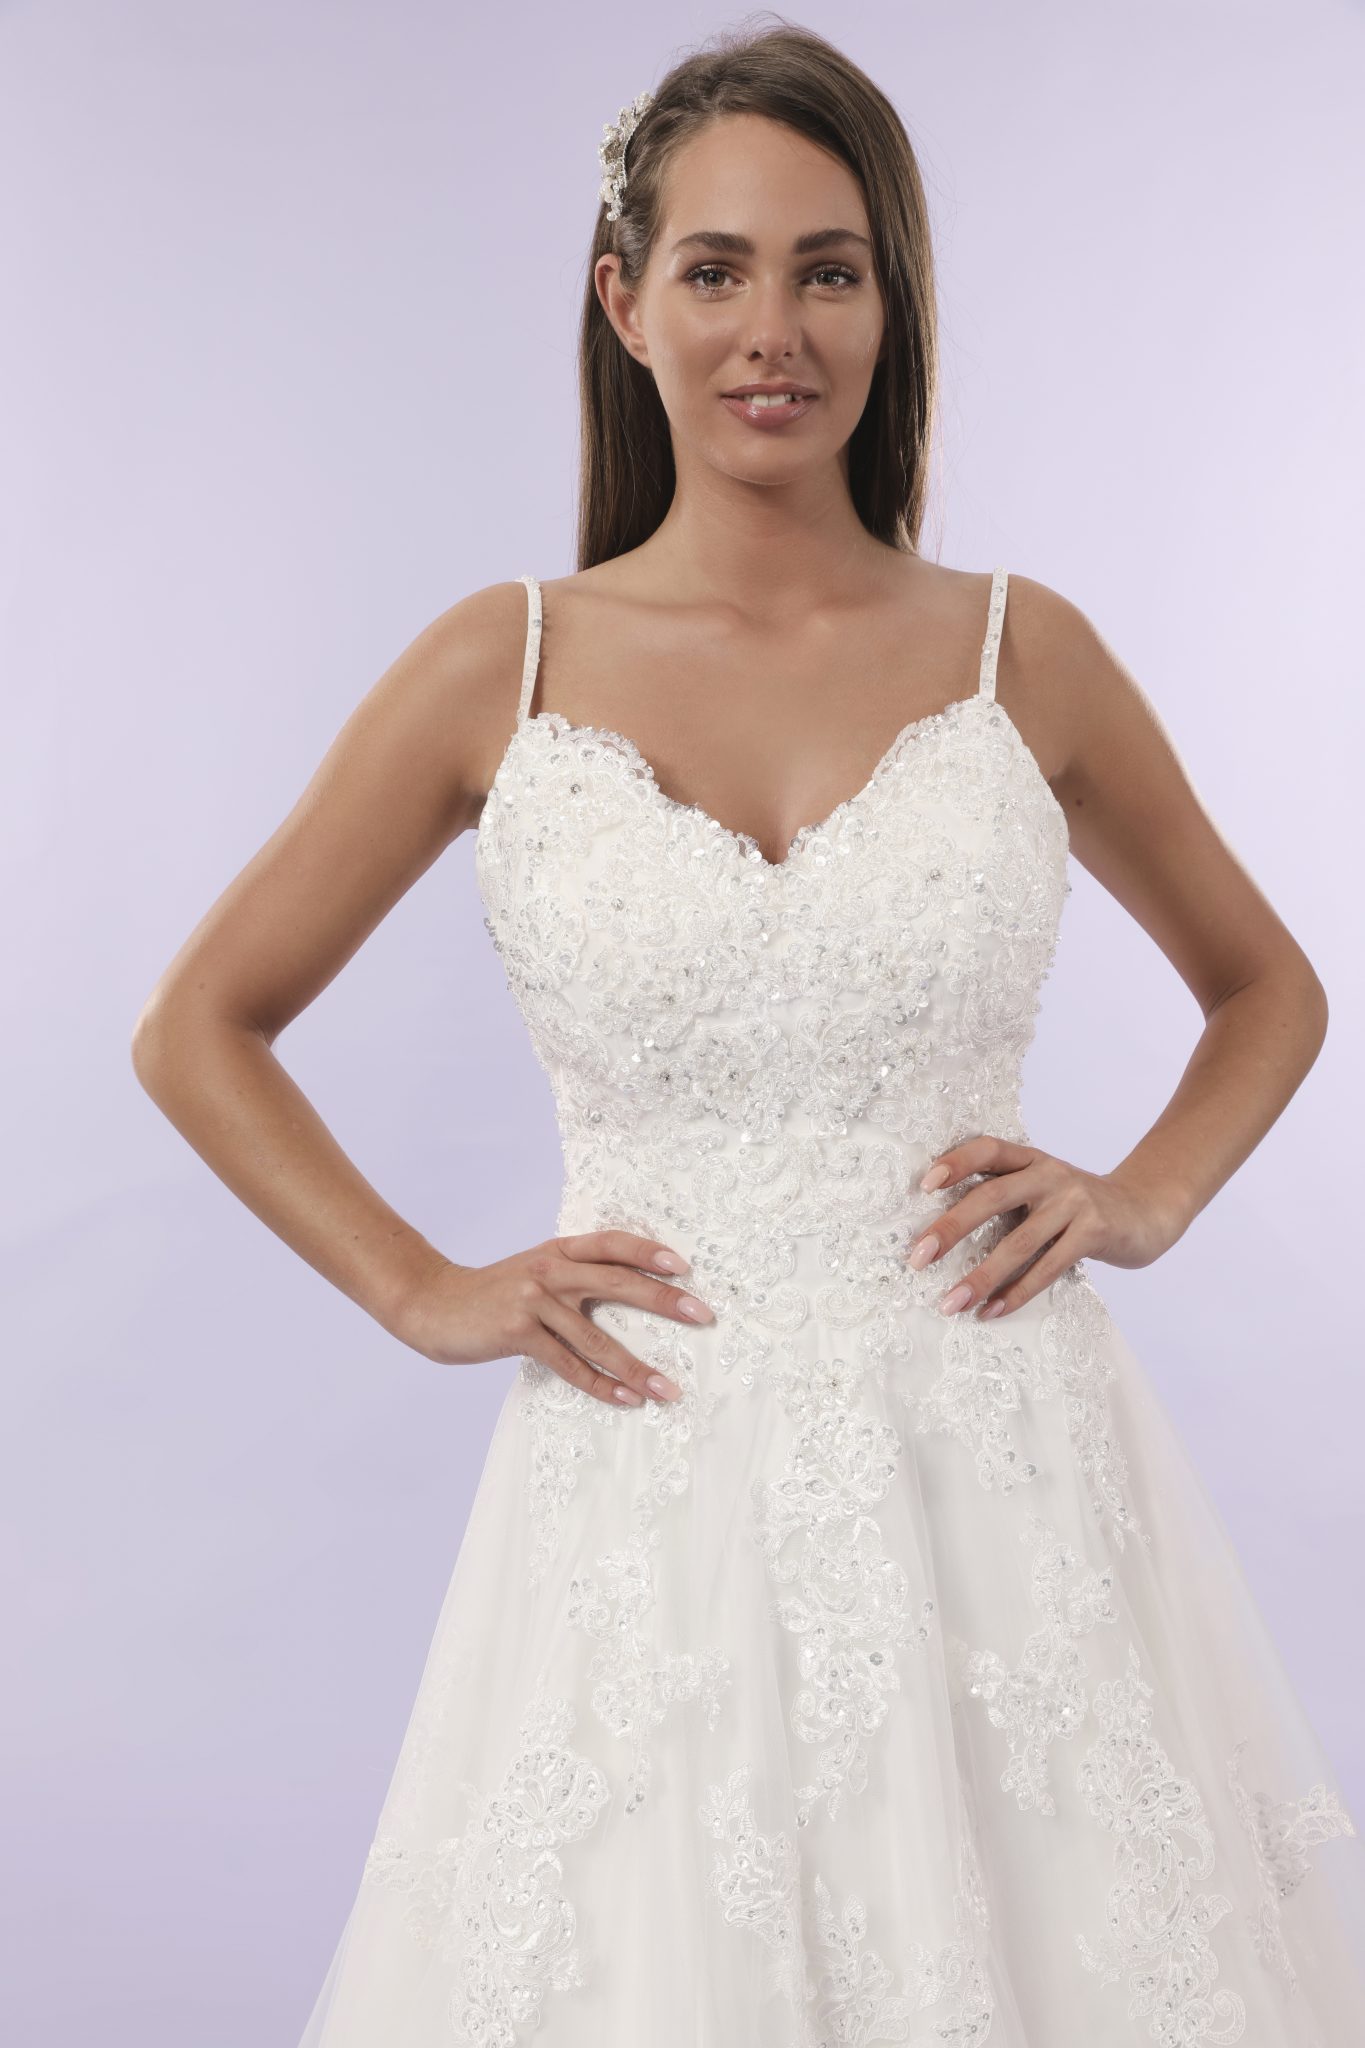 Camille Wed4less Wedding Dress Outlet Stockport